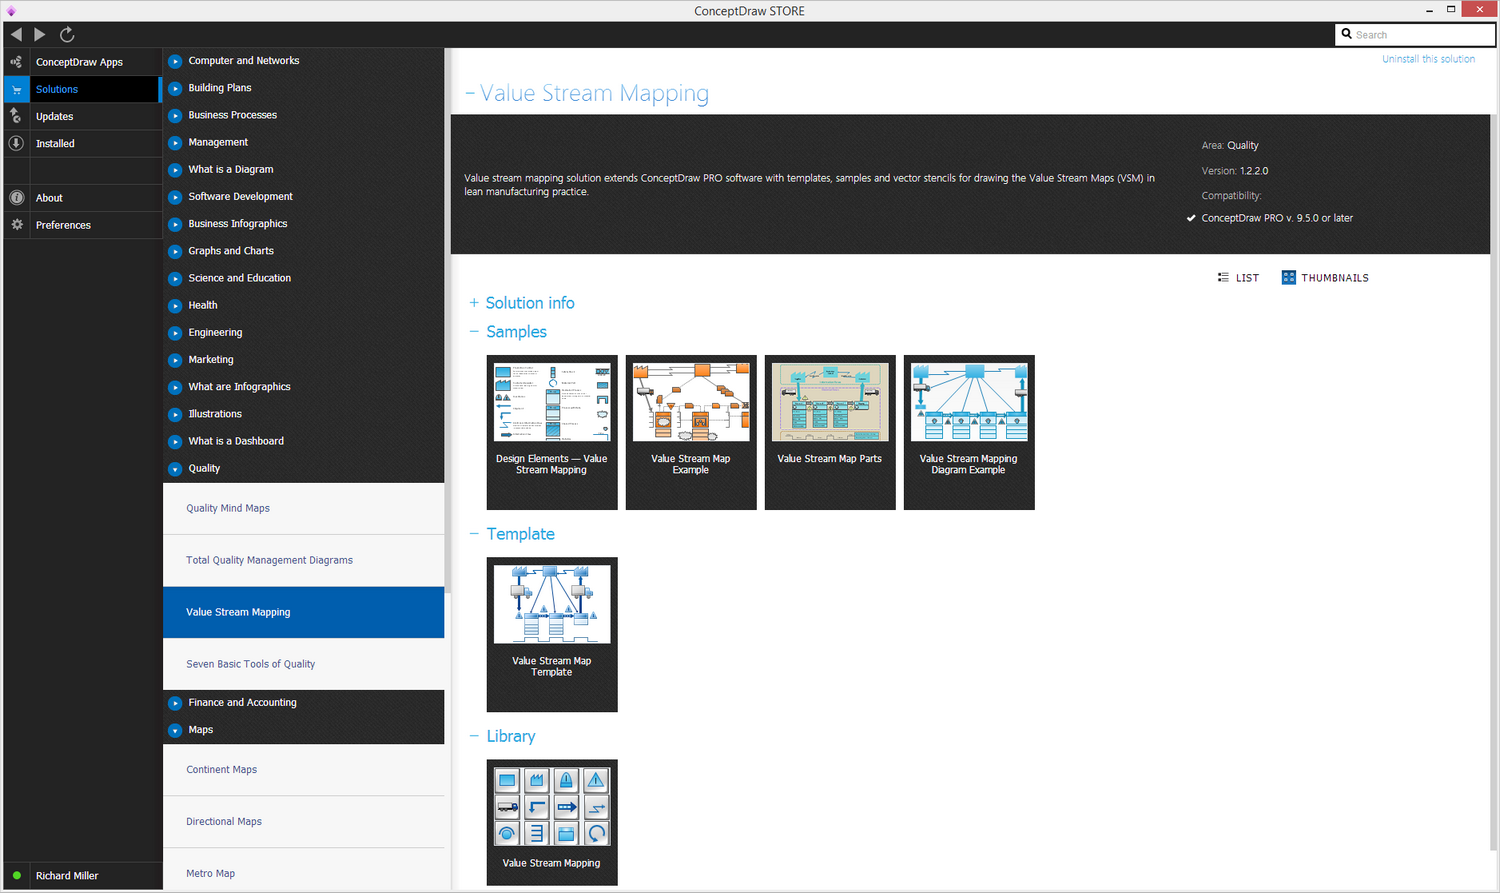 Value Stream Mapping Solution in ConceptDraw STORE